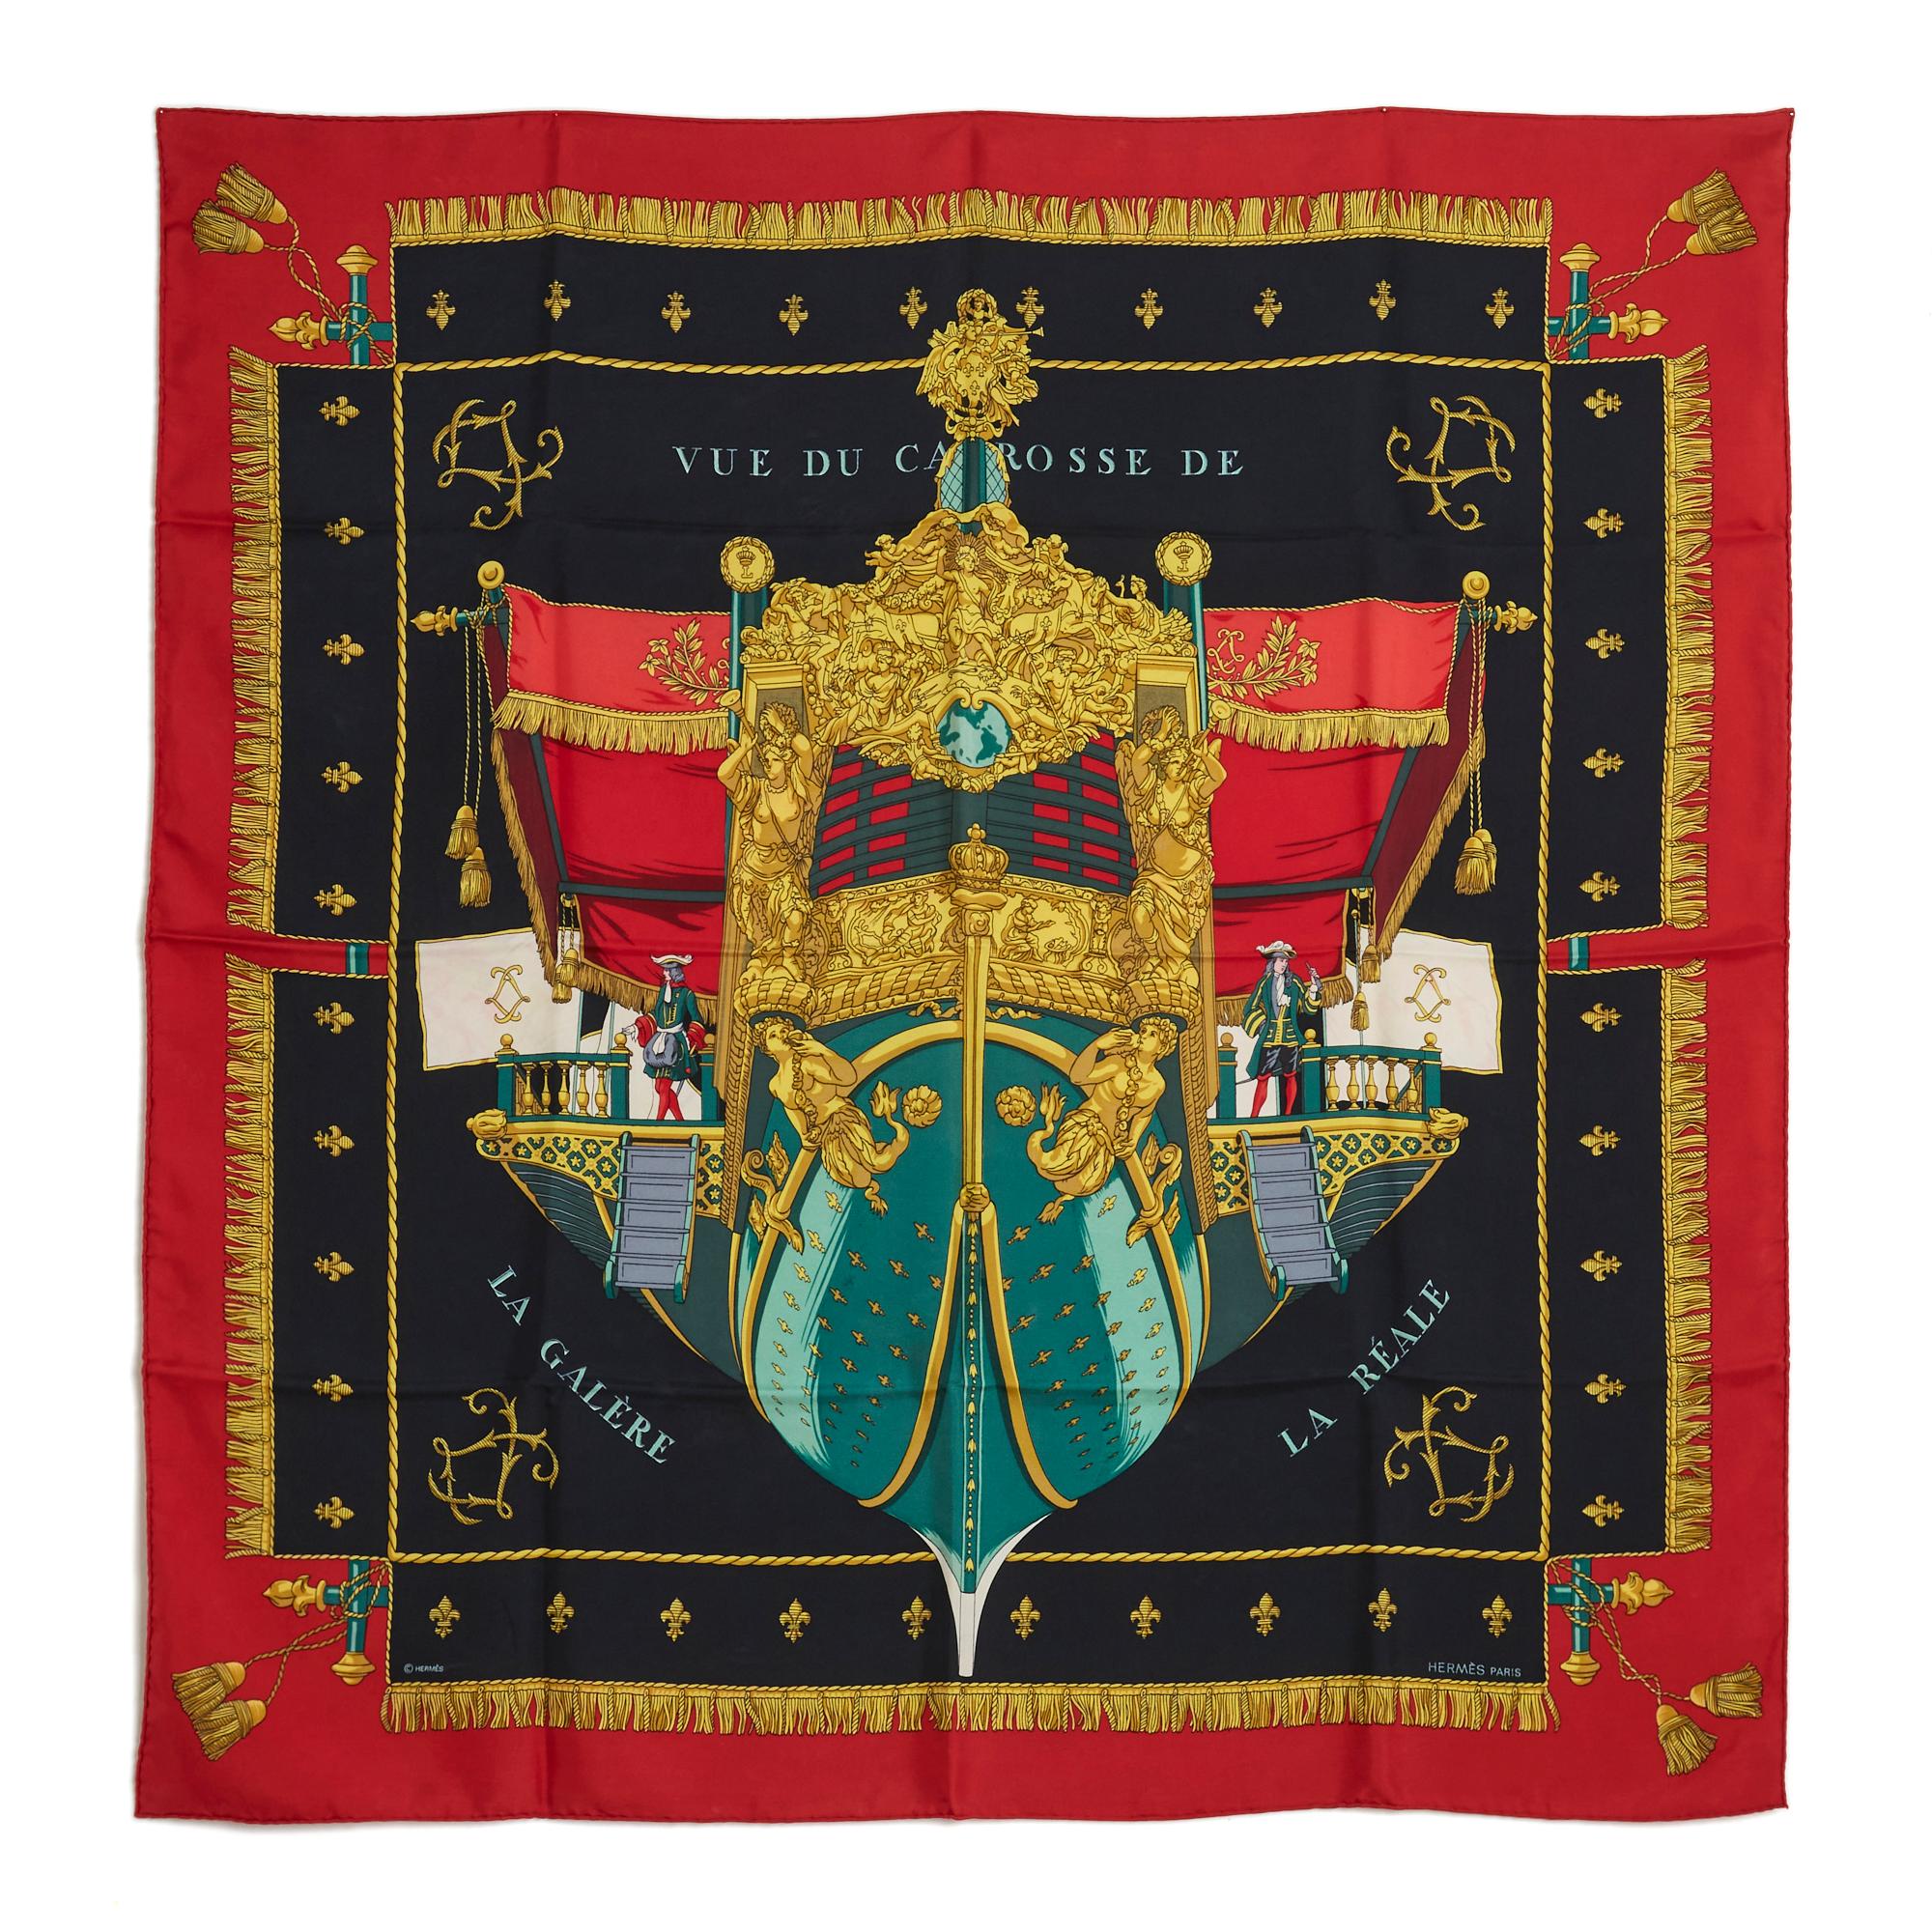 Hermès square 90 scarf in silk twill, View of the coach of the galley La Reale pattern by Hugo Grygkar, published in 1953, reissued in 1992 (like this one) and in 2007, with wide red edges and central motif on a black background, hand rolled edges.